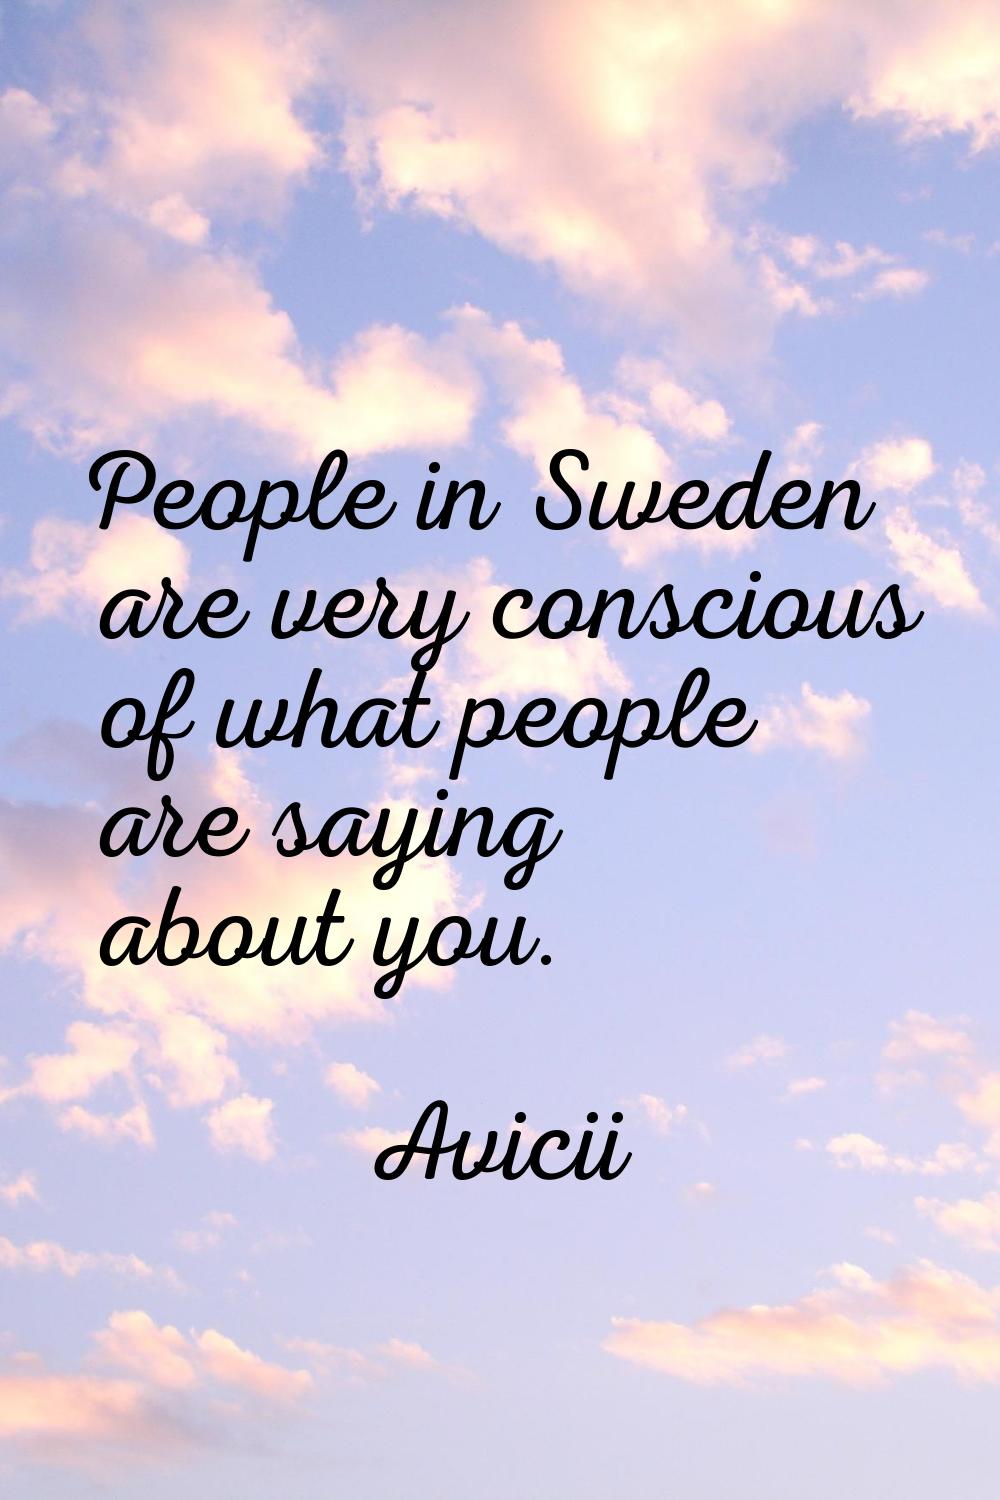 People in Sweden are very conscious of what people are saying about you.